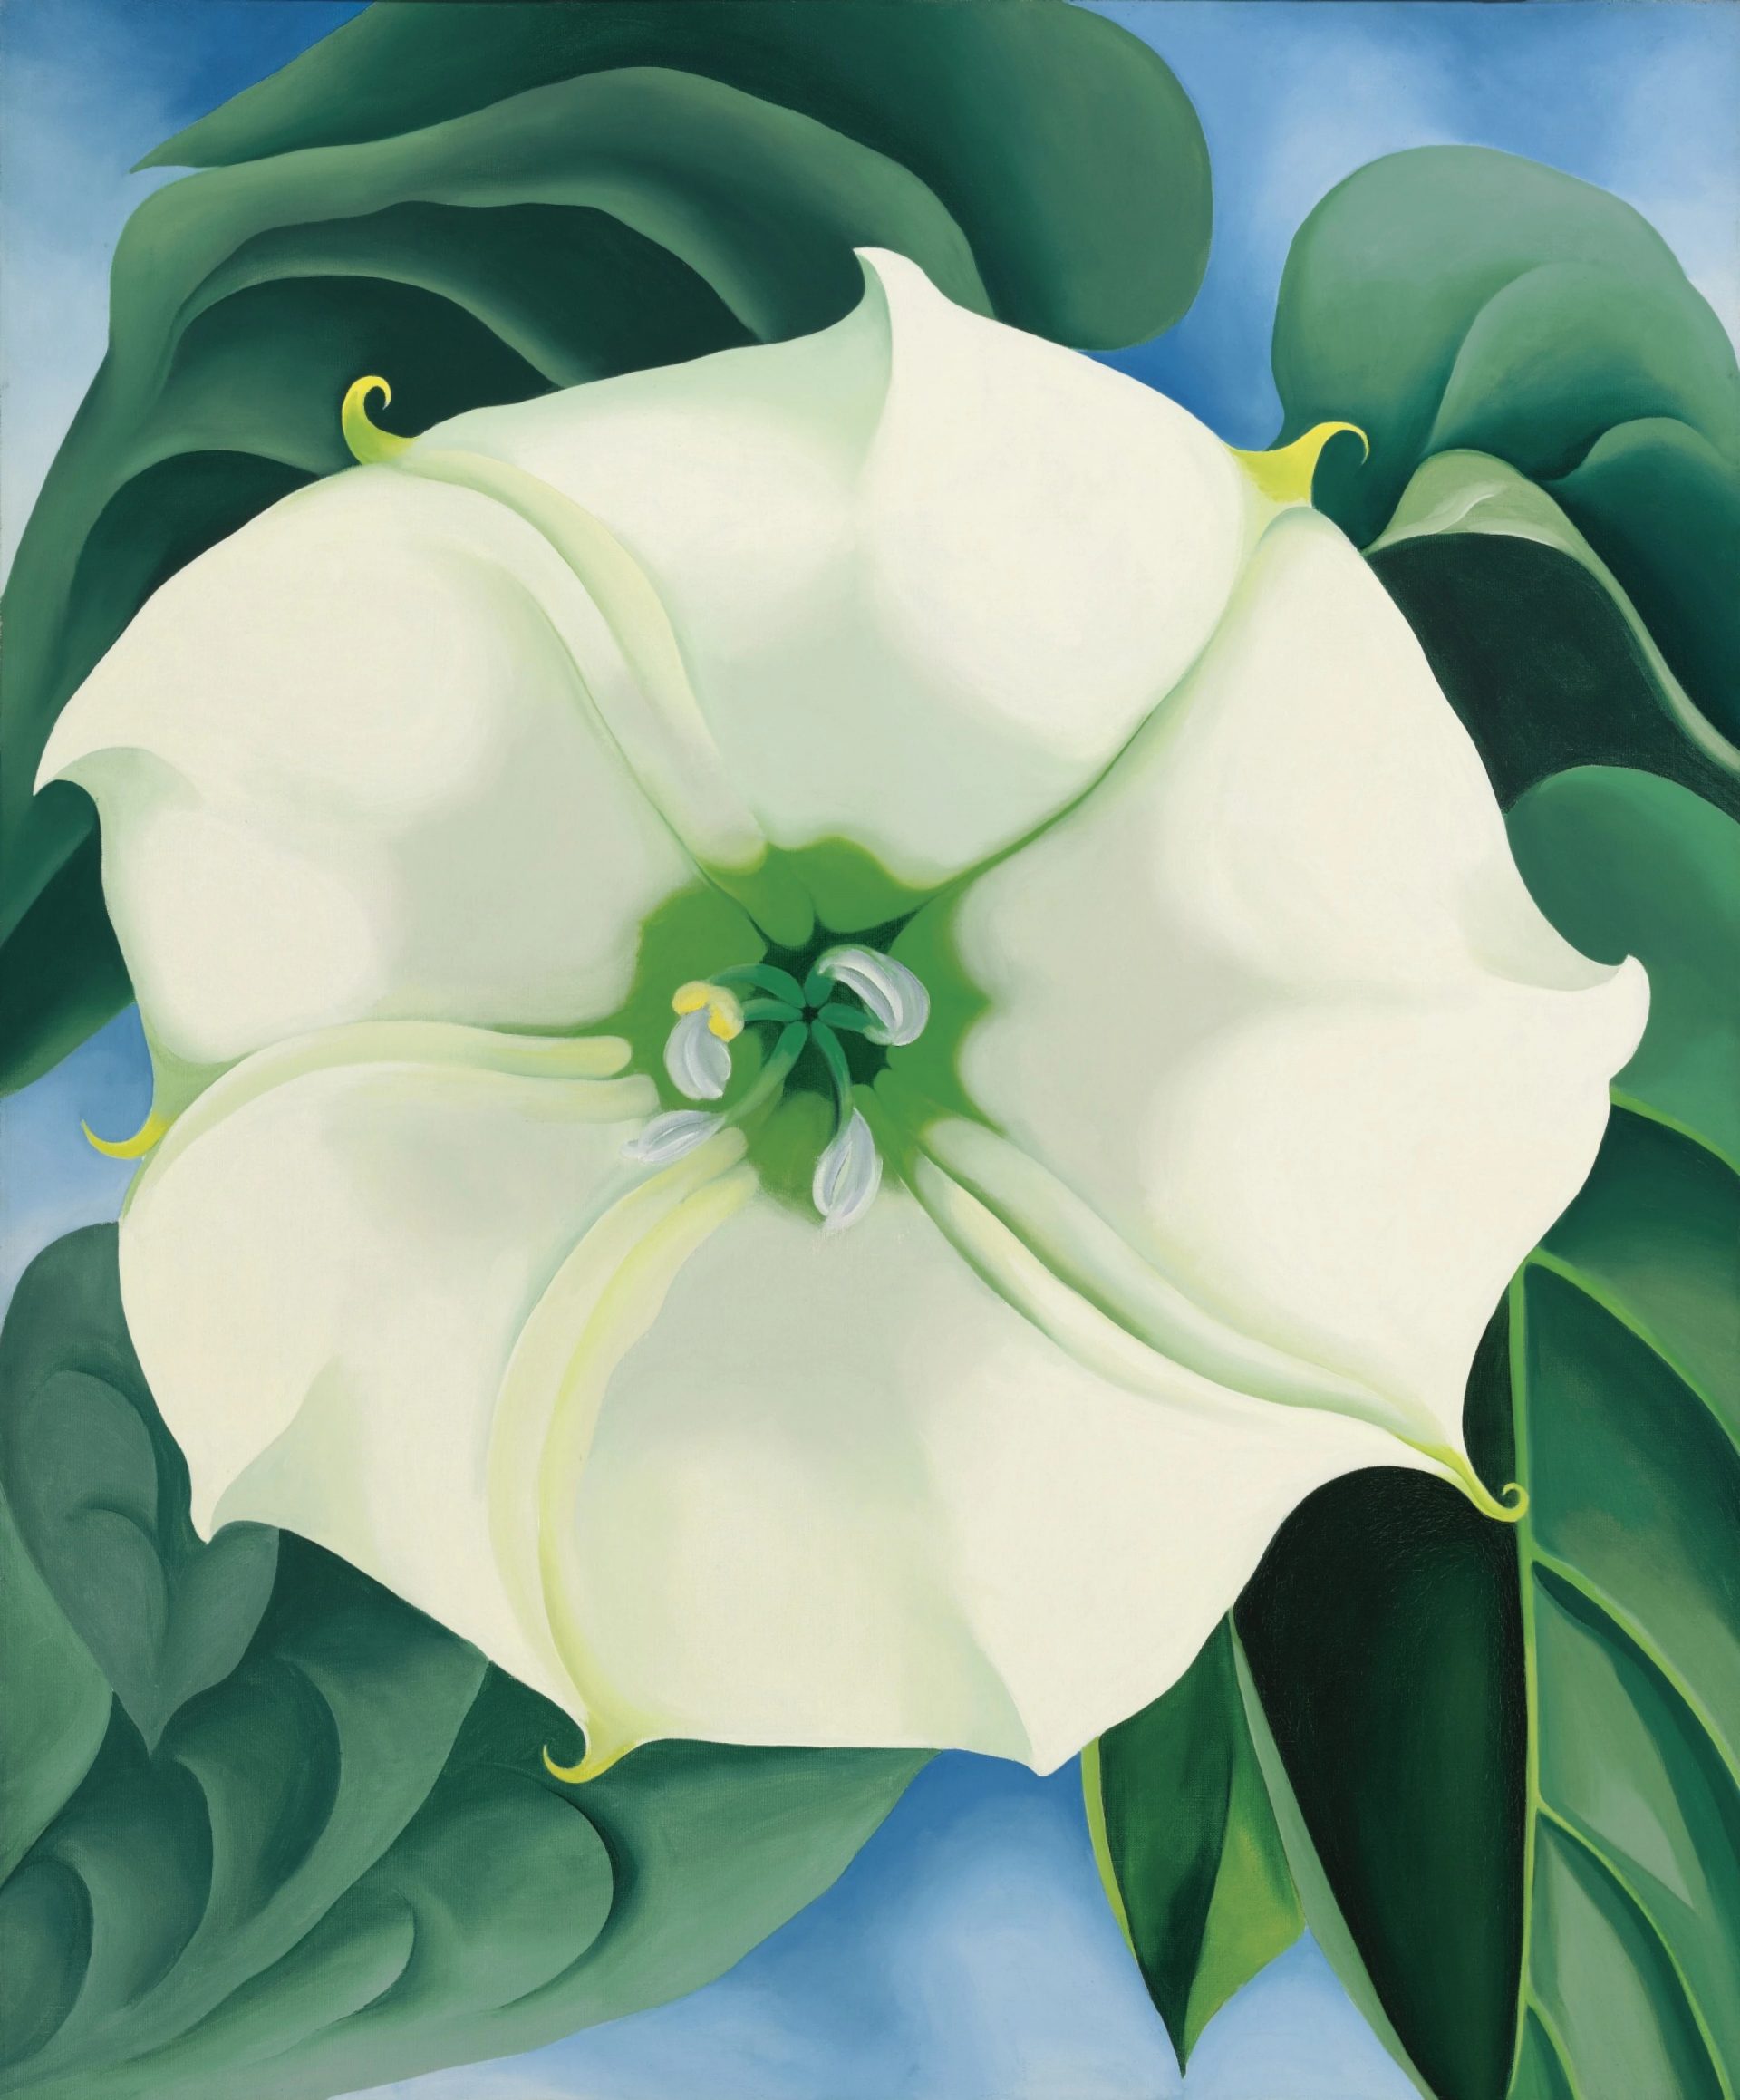 A detailed painting by Georgia O'Keeffe, depicting an oversized Jimson Weed flower, featuring delicately rendered white petals contrasted against a dark, minimalistic background.